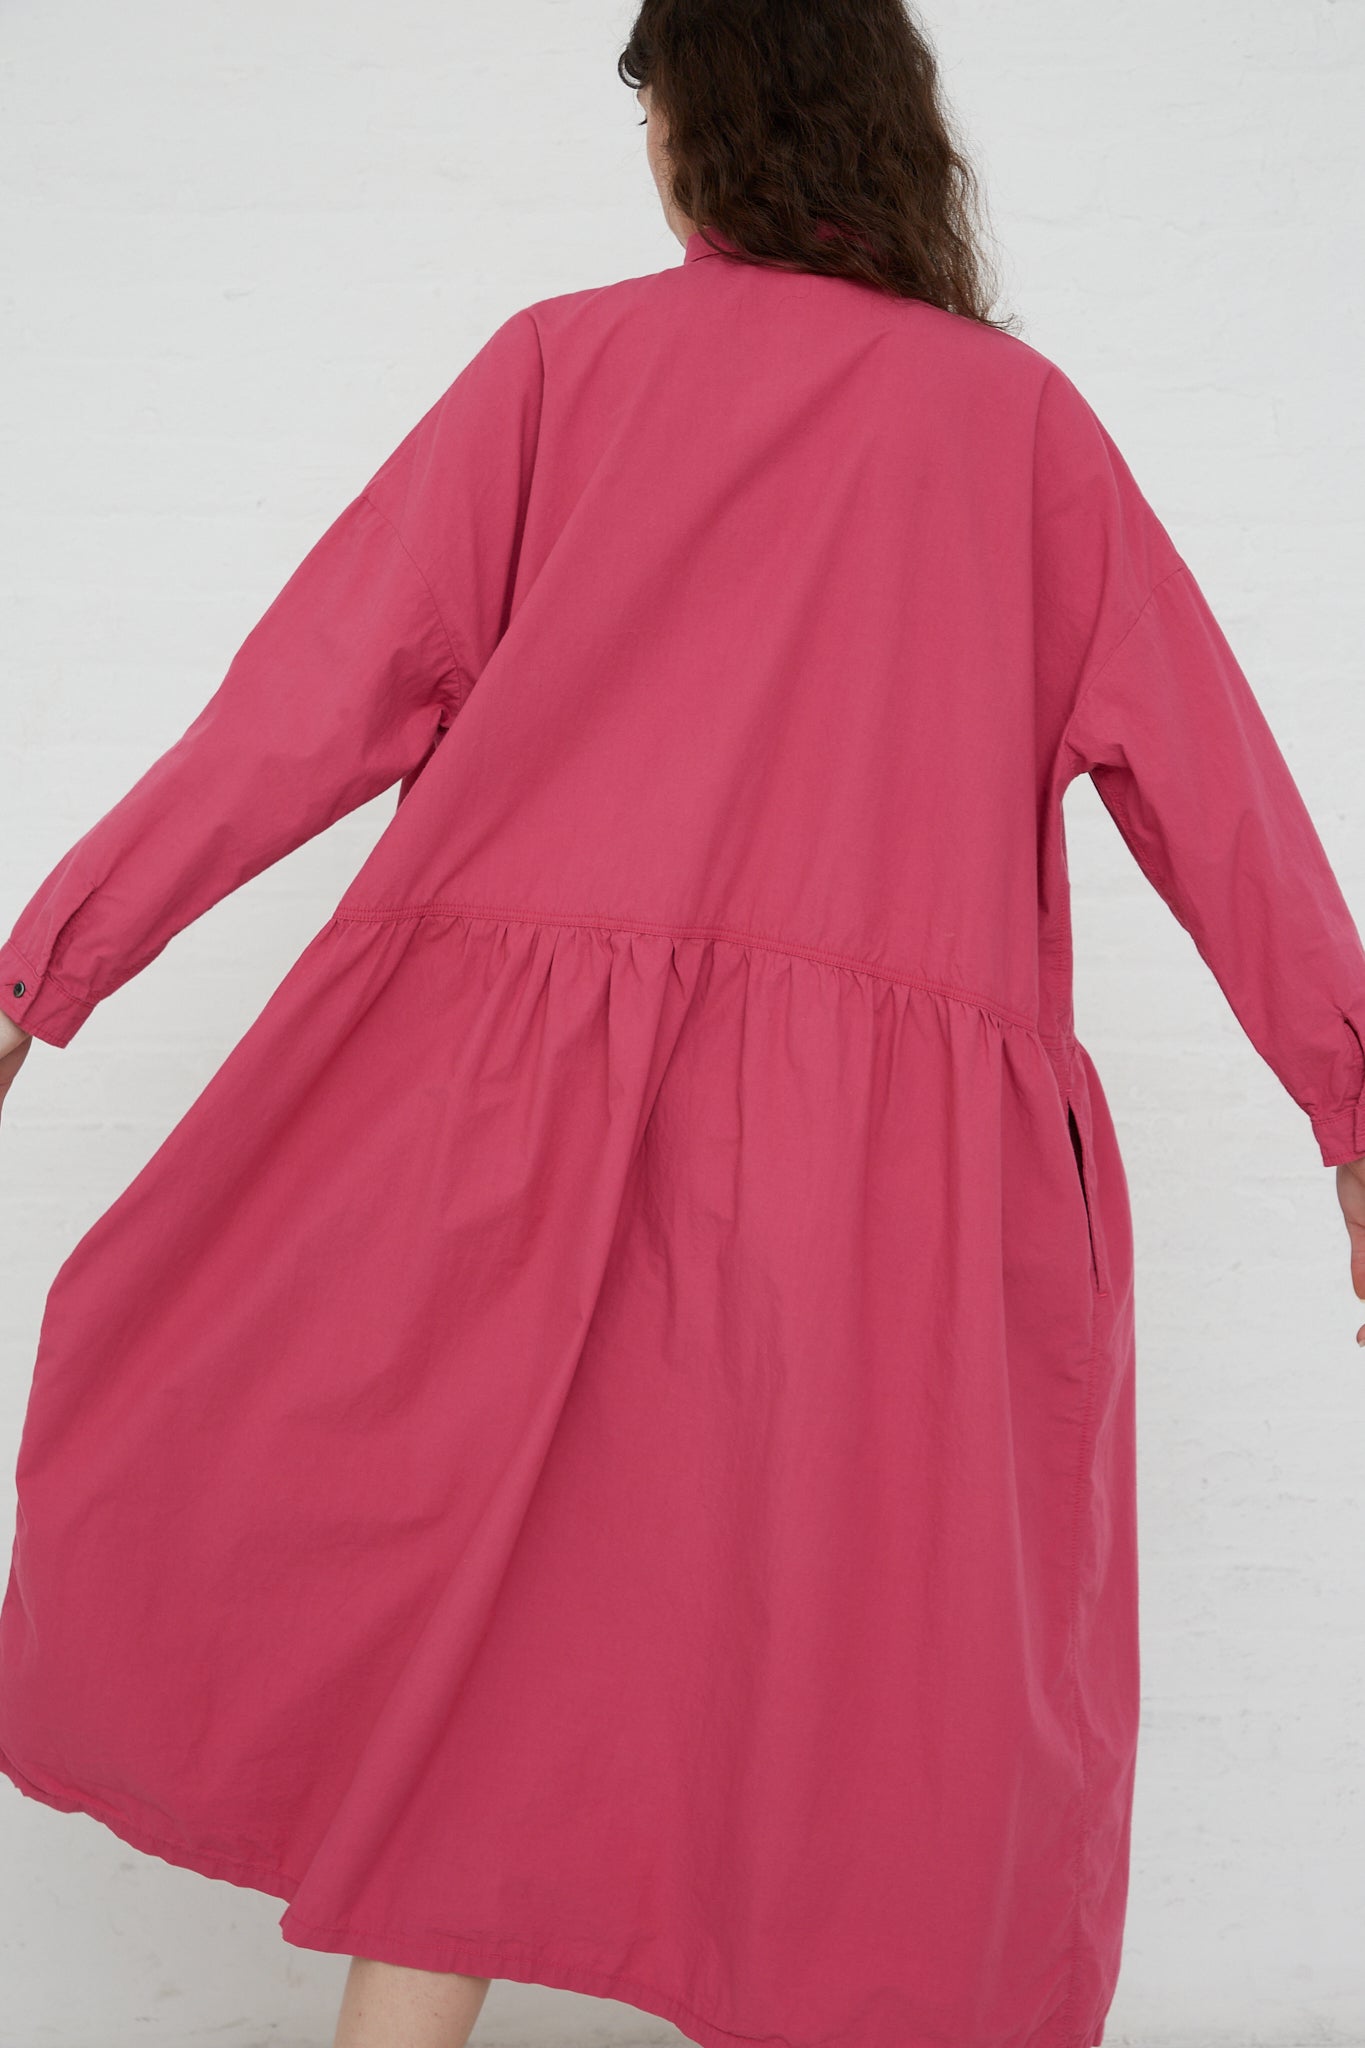 The back view of a woman wearing a Woven Cotton Oumisarashi Dress in Plum raincoat from Ichi Antiquités.